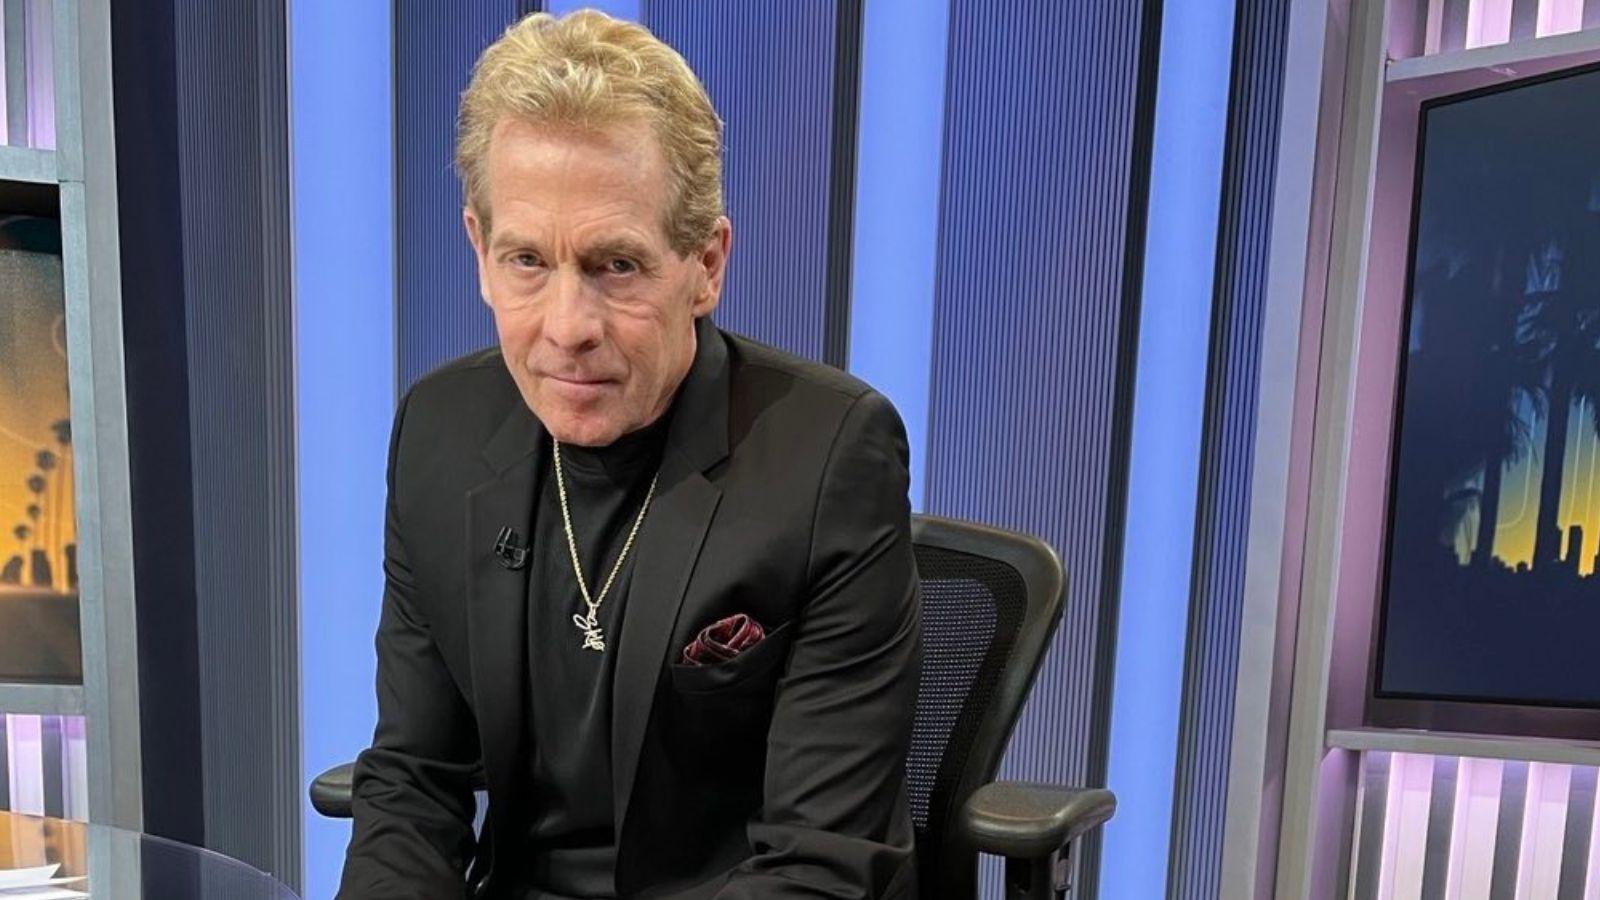 Skip Bayless on the set of FS1's Undisputed.